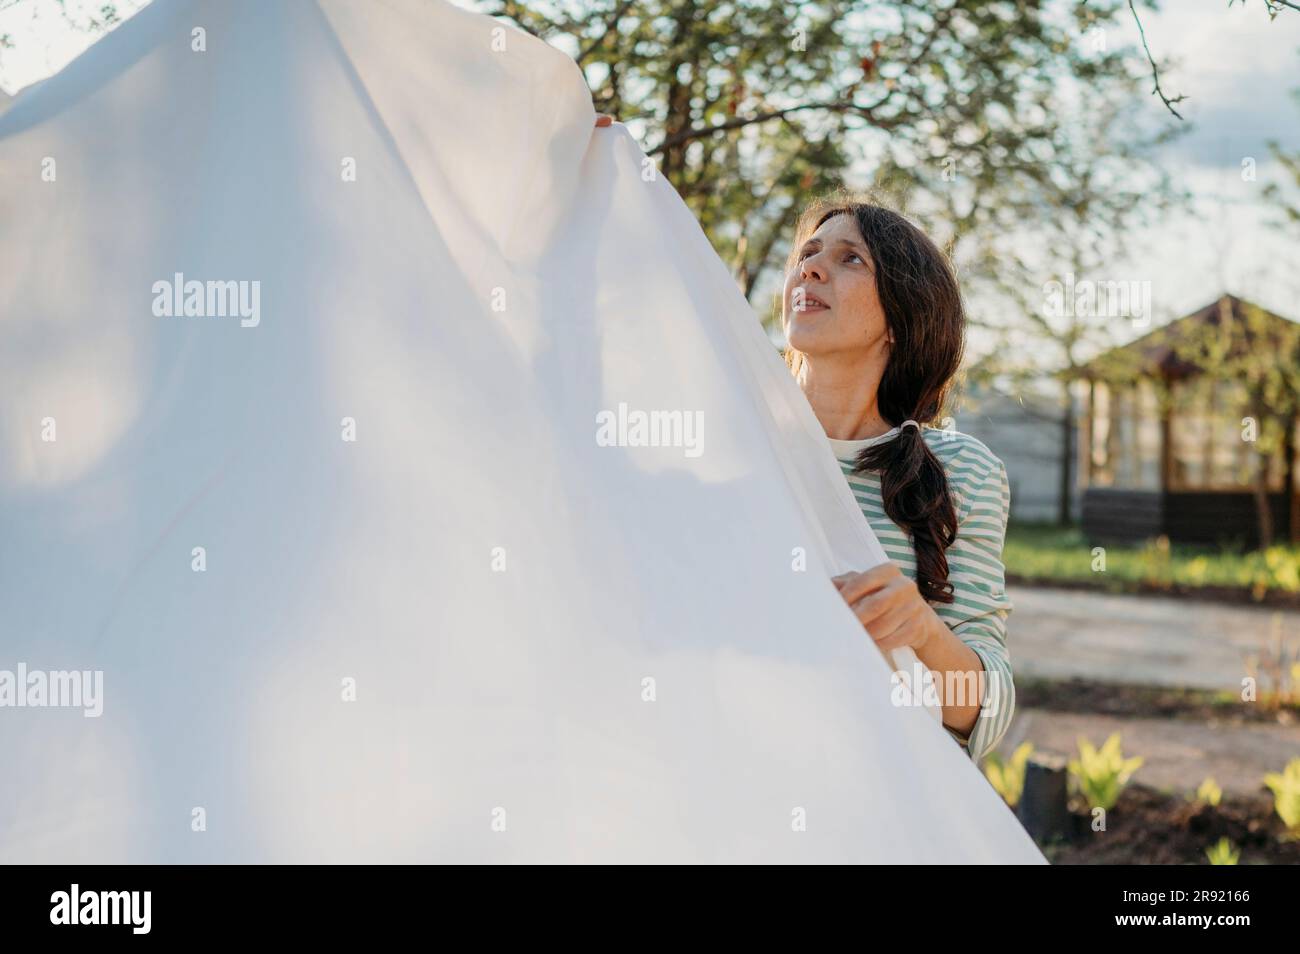 Woman drying white bedding sheet on clothesline in back yard Stock Photo